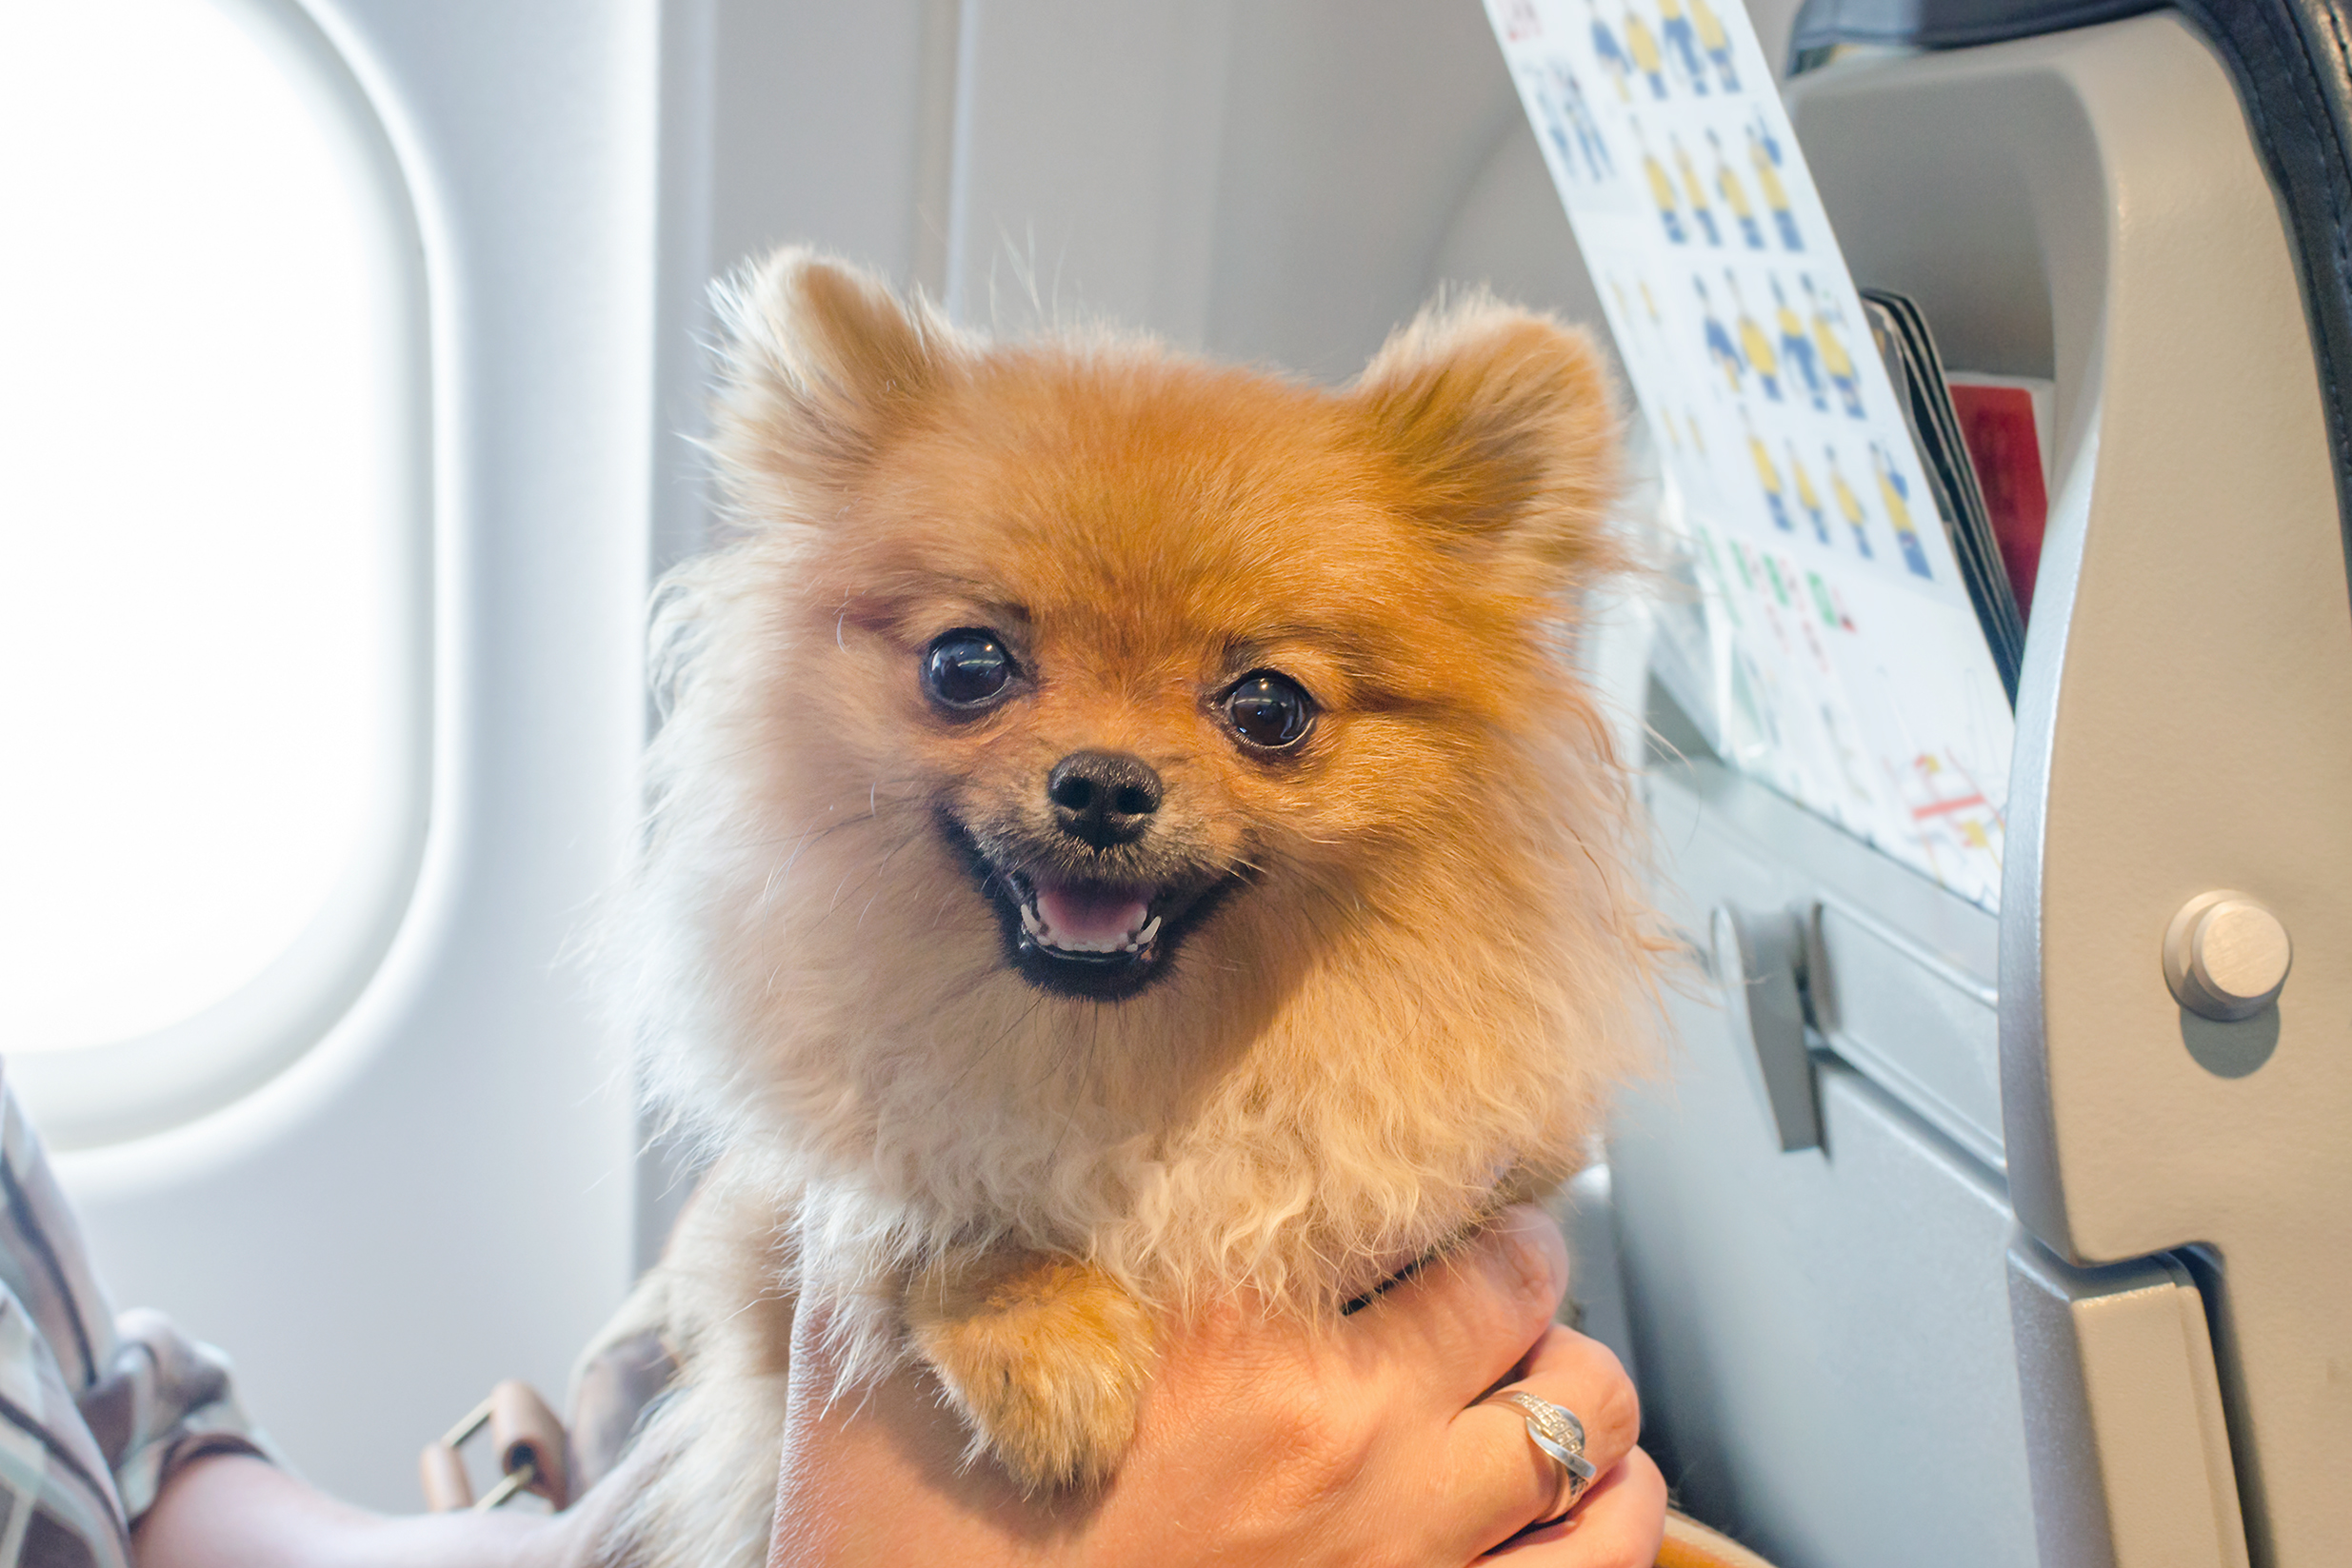 Passengers Outraged by Pet Poo Incident on Flight